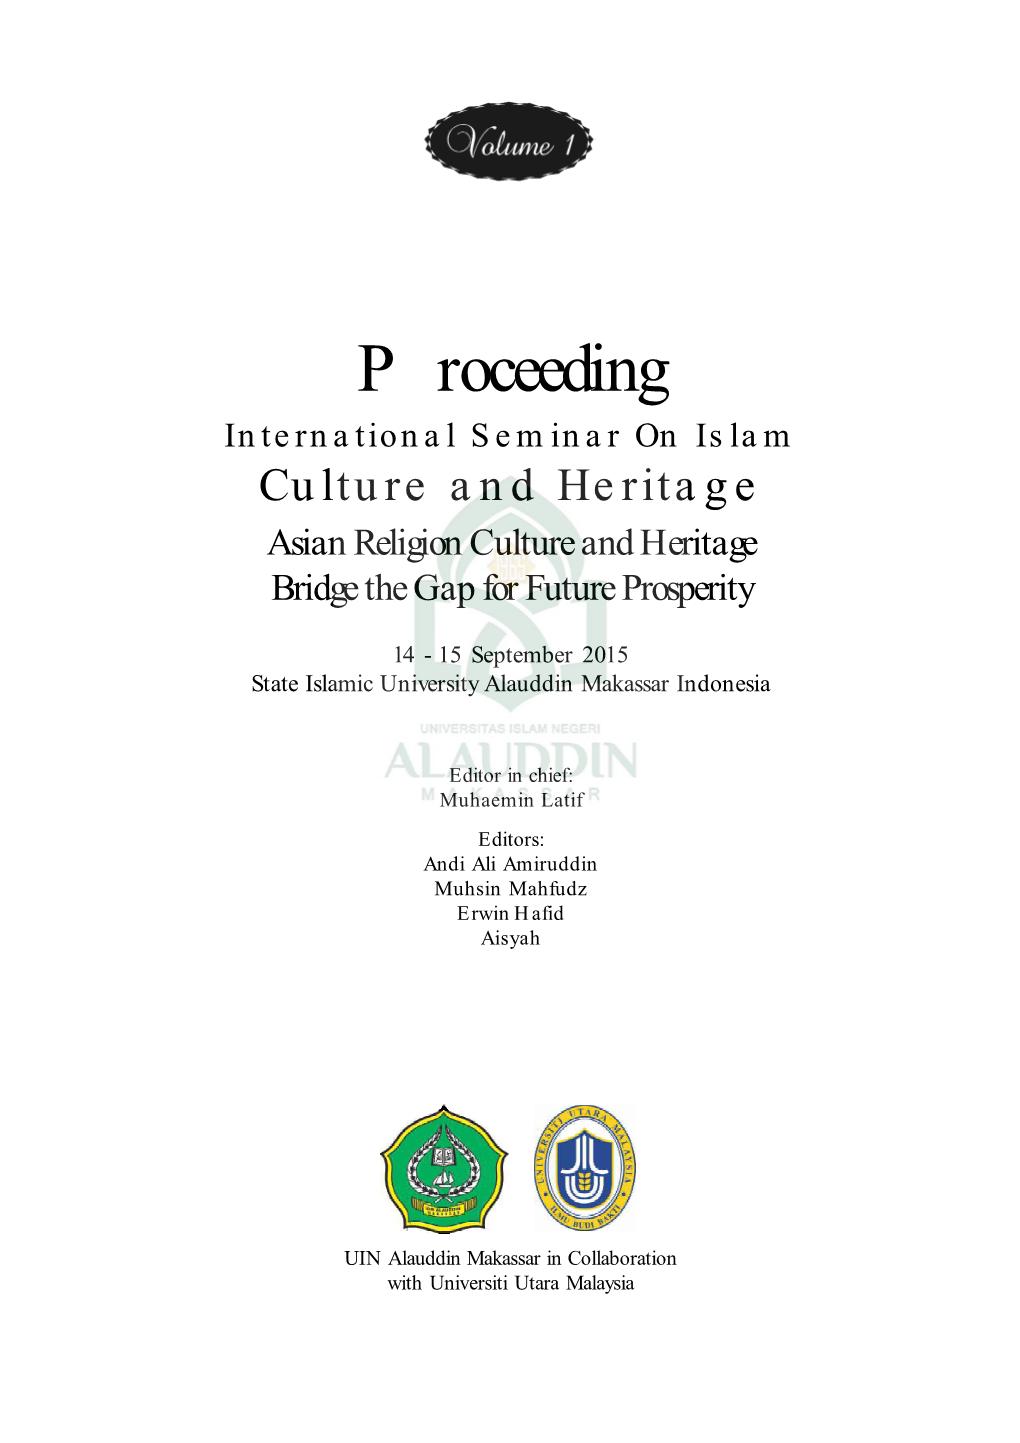 Proceeding International Seminar on Islam Culture and Heritage Asian Religion Culture and Heritage Bridge the Gap for Future Prosperity